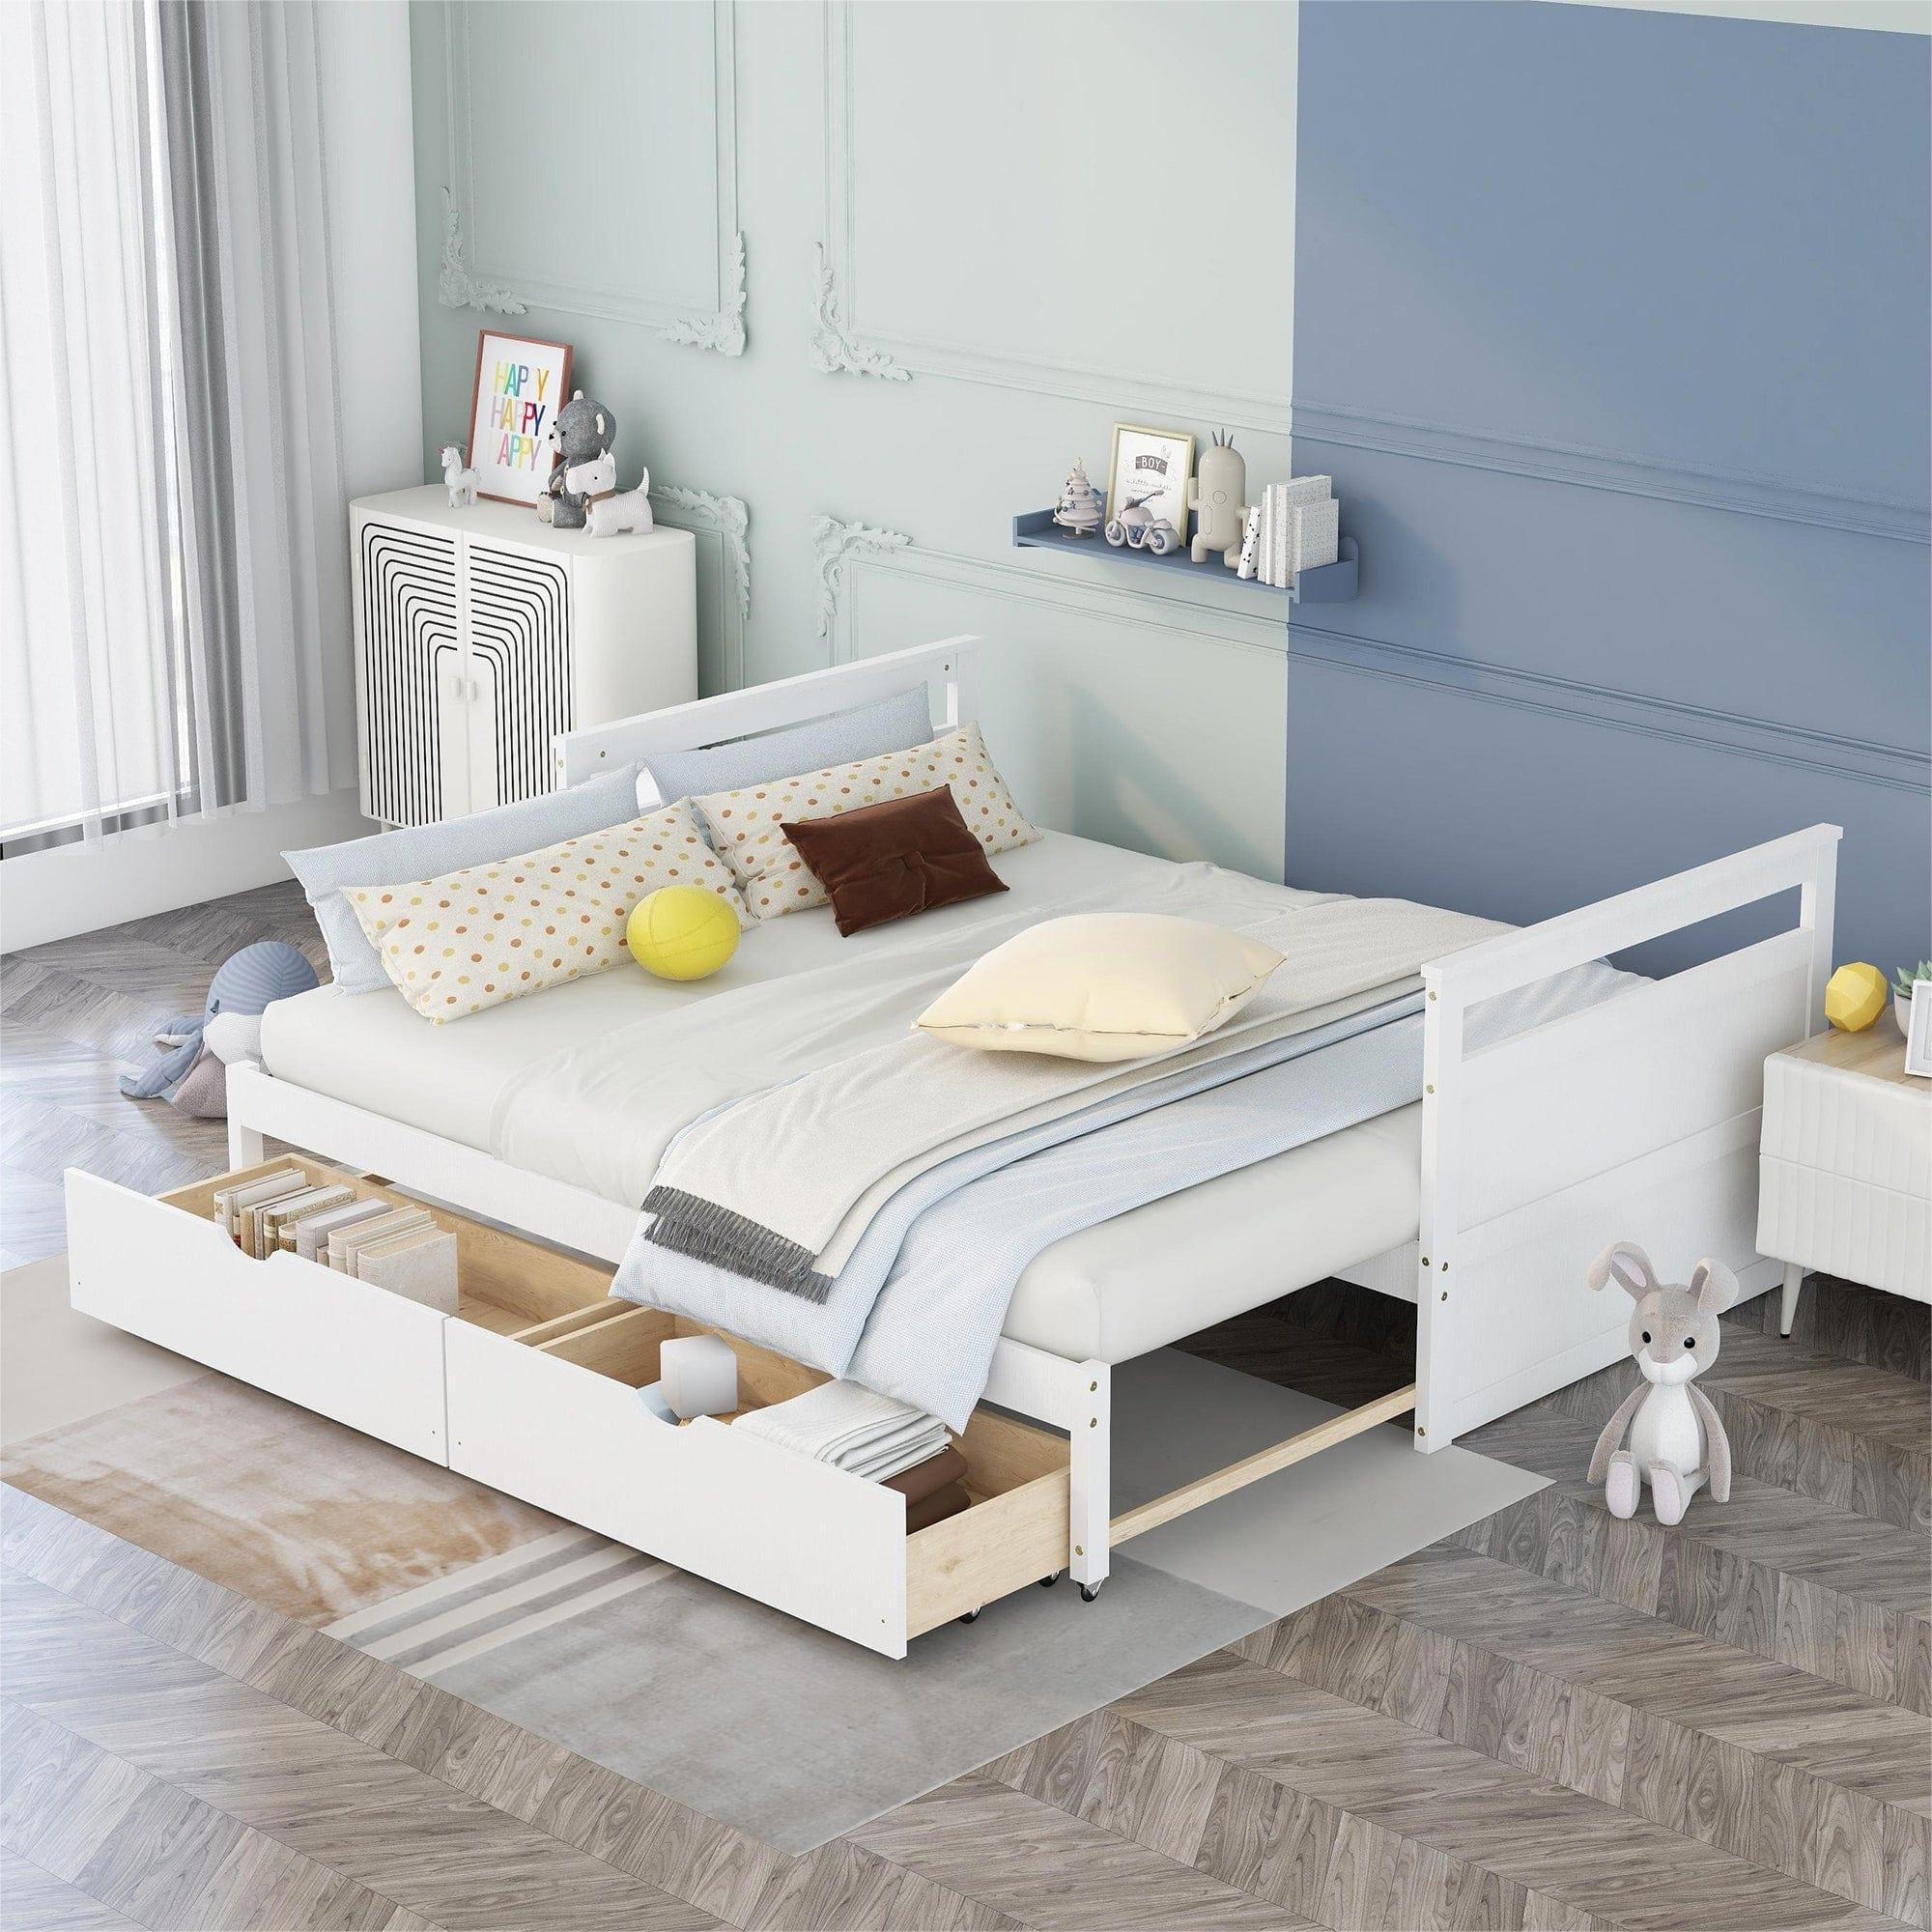 Shop Sicily Bed - Twin Mademoiselle Home Decor